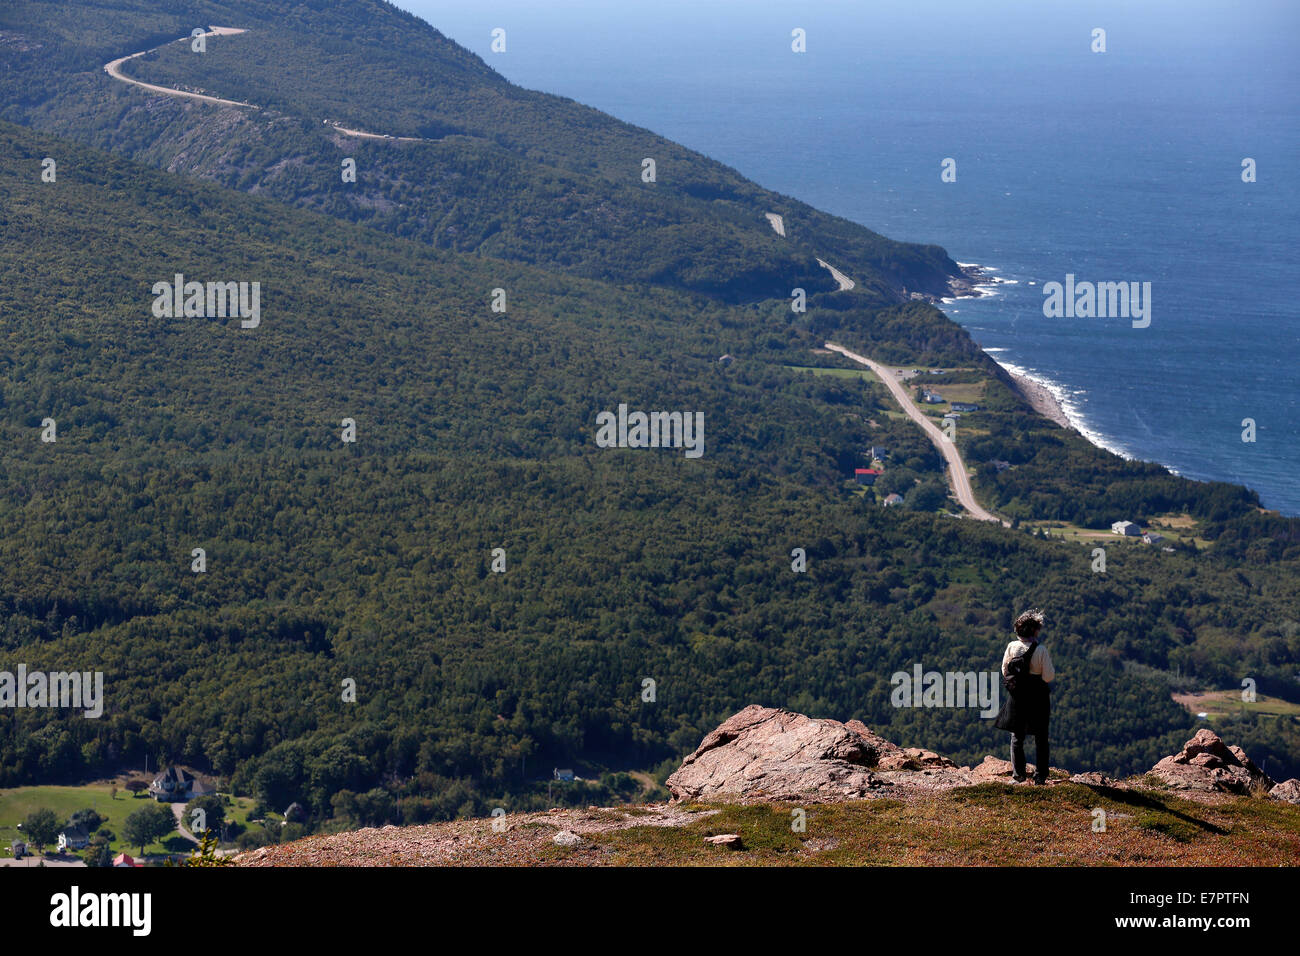 Woman standing on Roberts Mountain overlooking Pleasant Bay and the Cabot Trail, Cape Breton Island, Nova Scotia, Canada Stock Photo